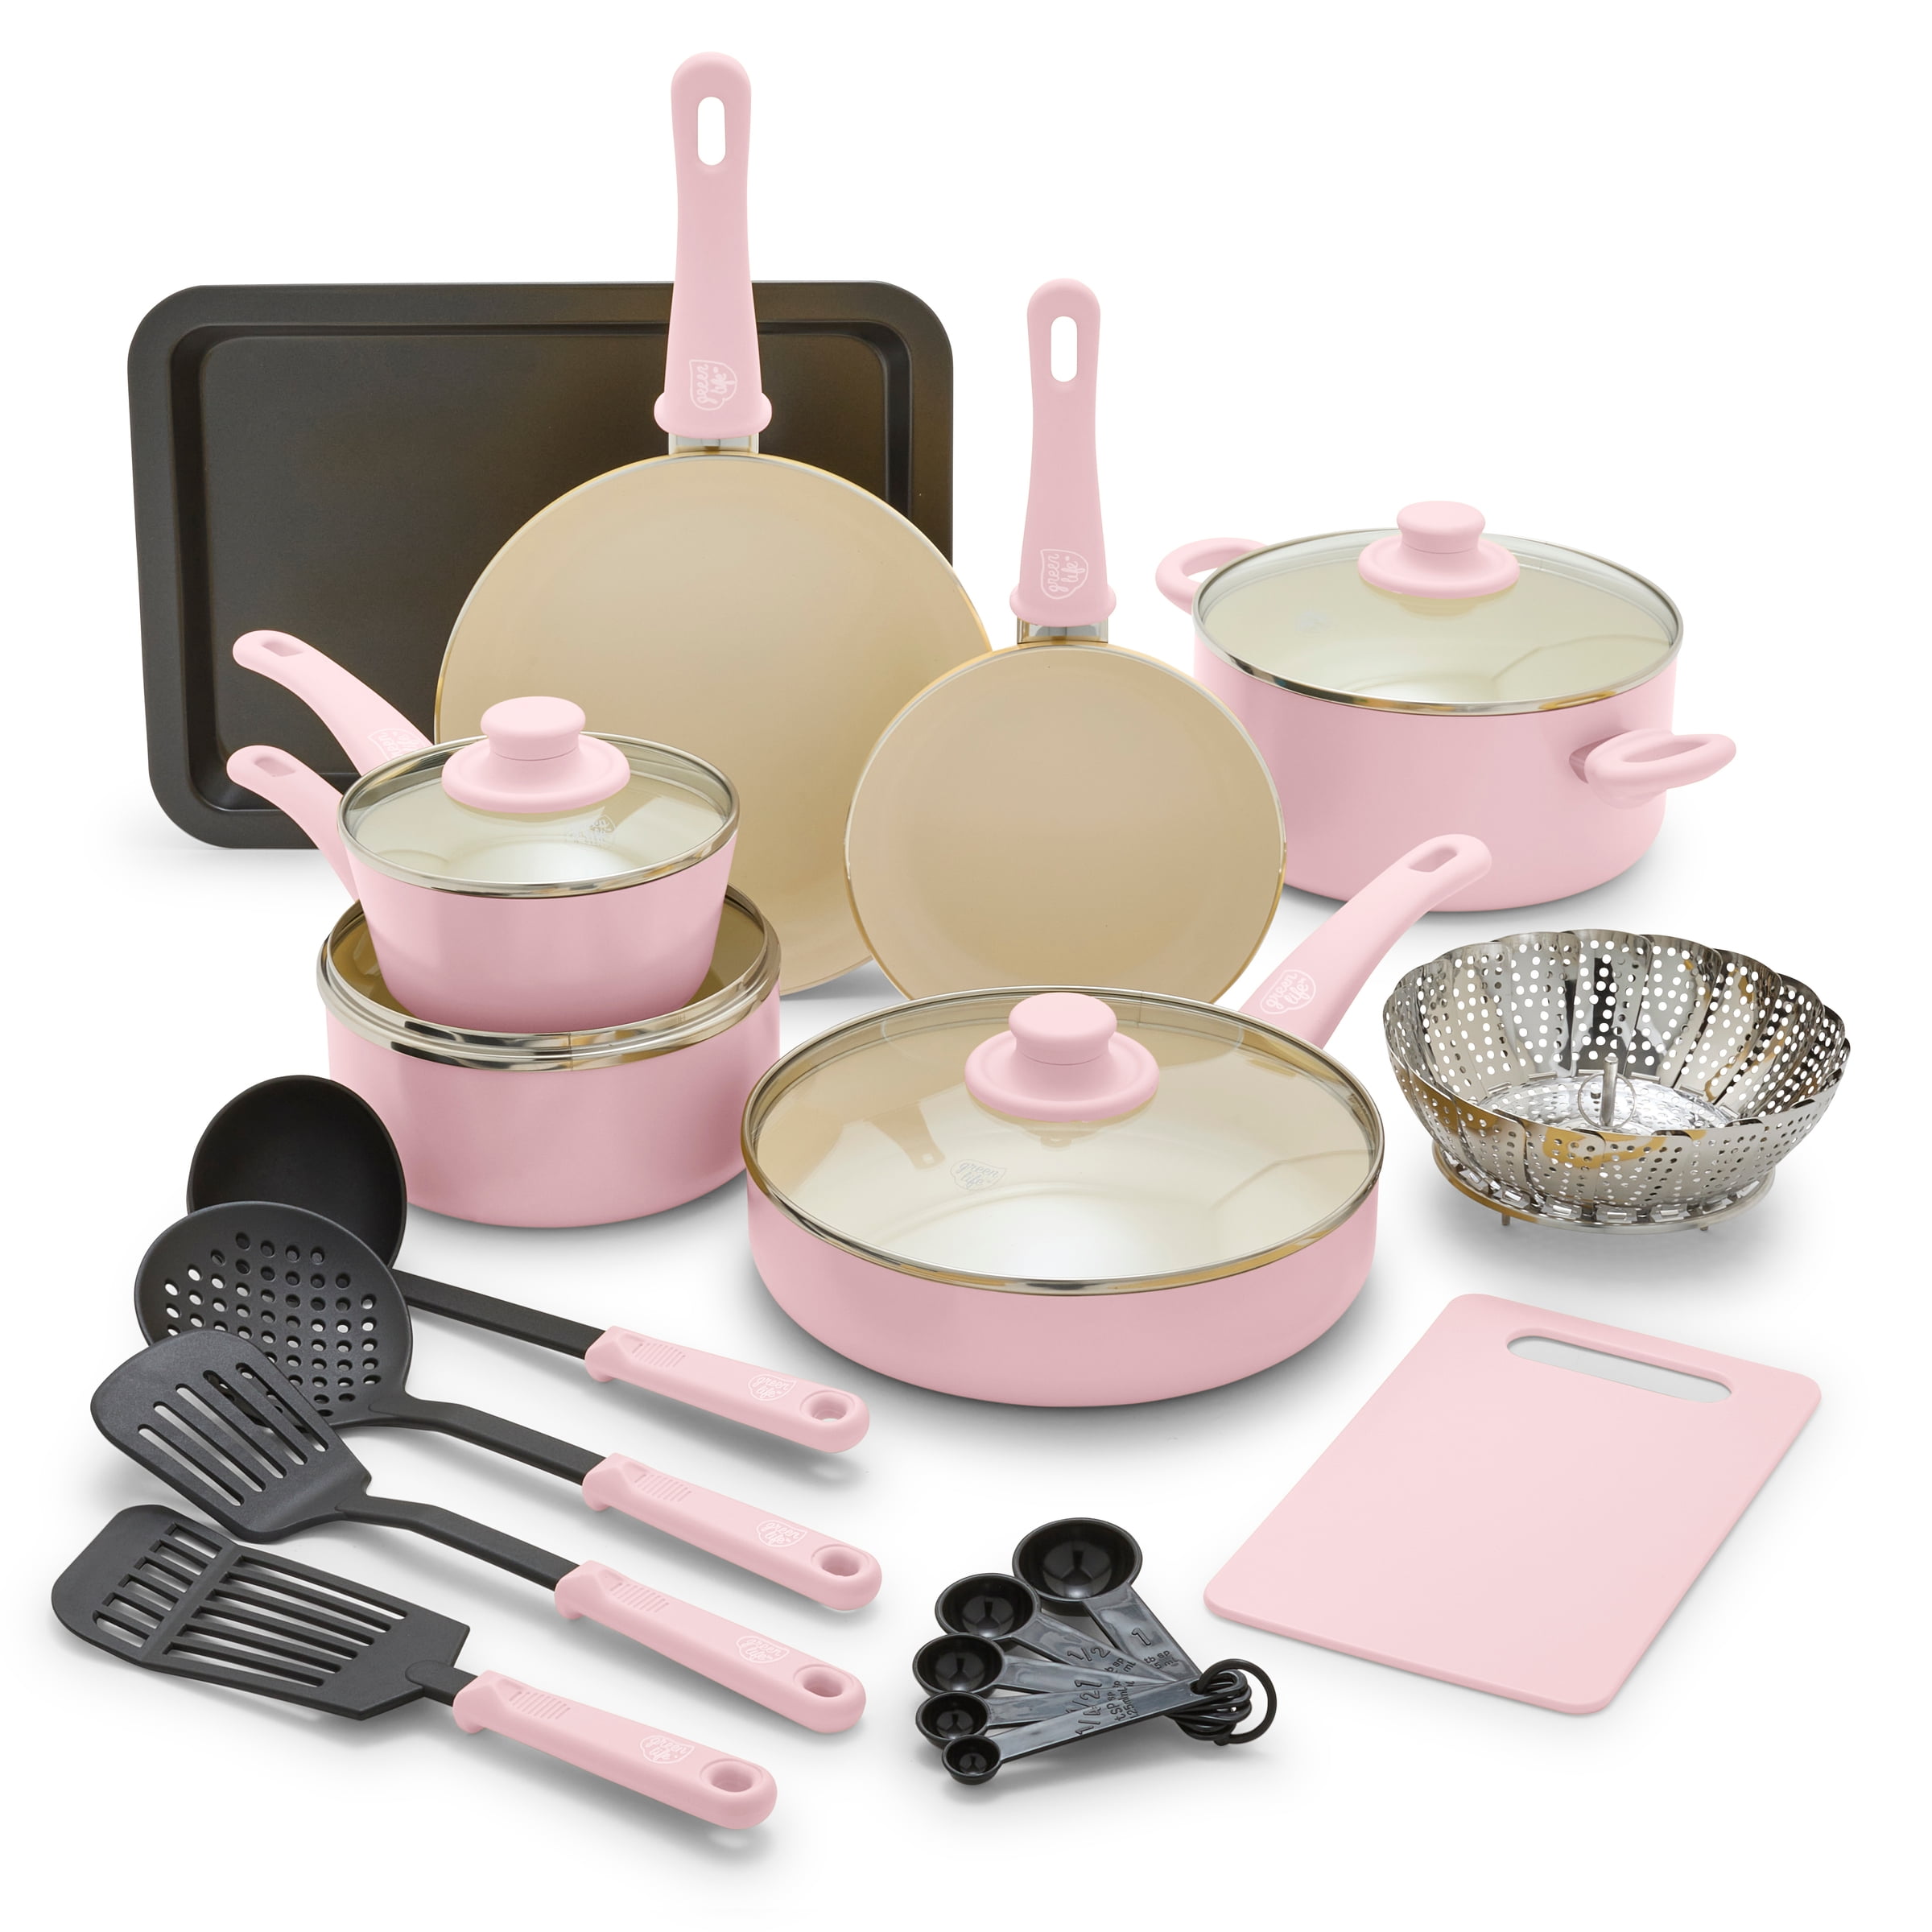 GreenLife Artisan Healthy Ceramic Nonstick, 12 Piece Cookware Pots and Pans  Set in Soft Pink CC004711-001 - The Home Depot